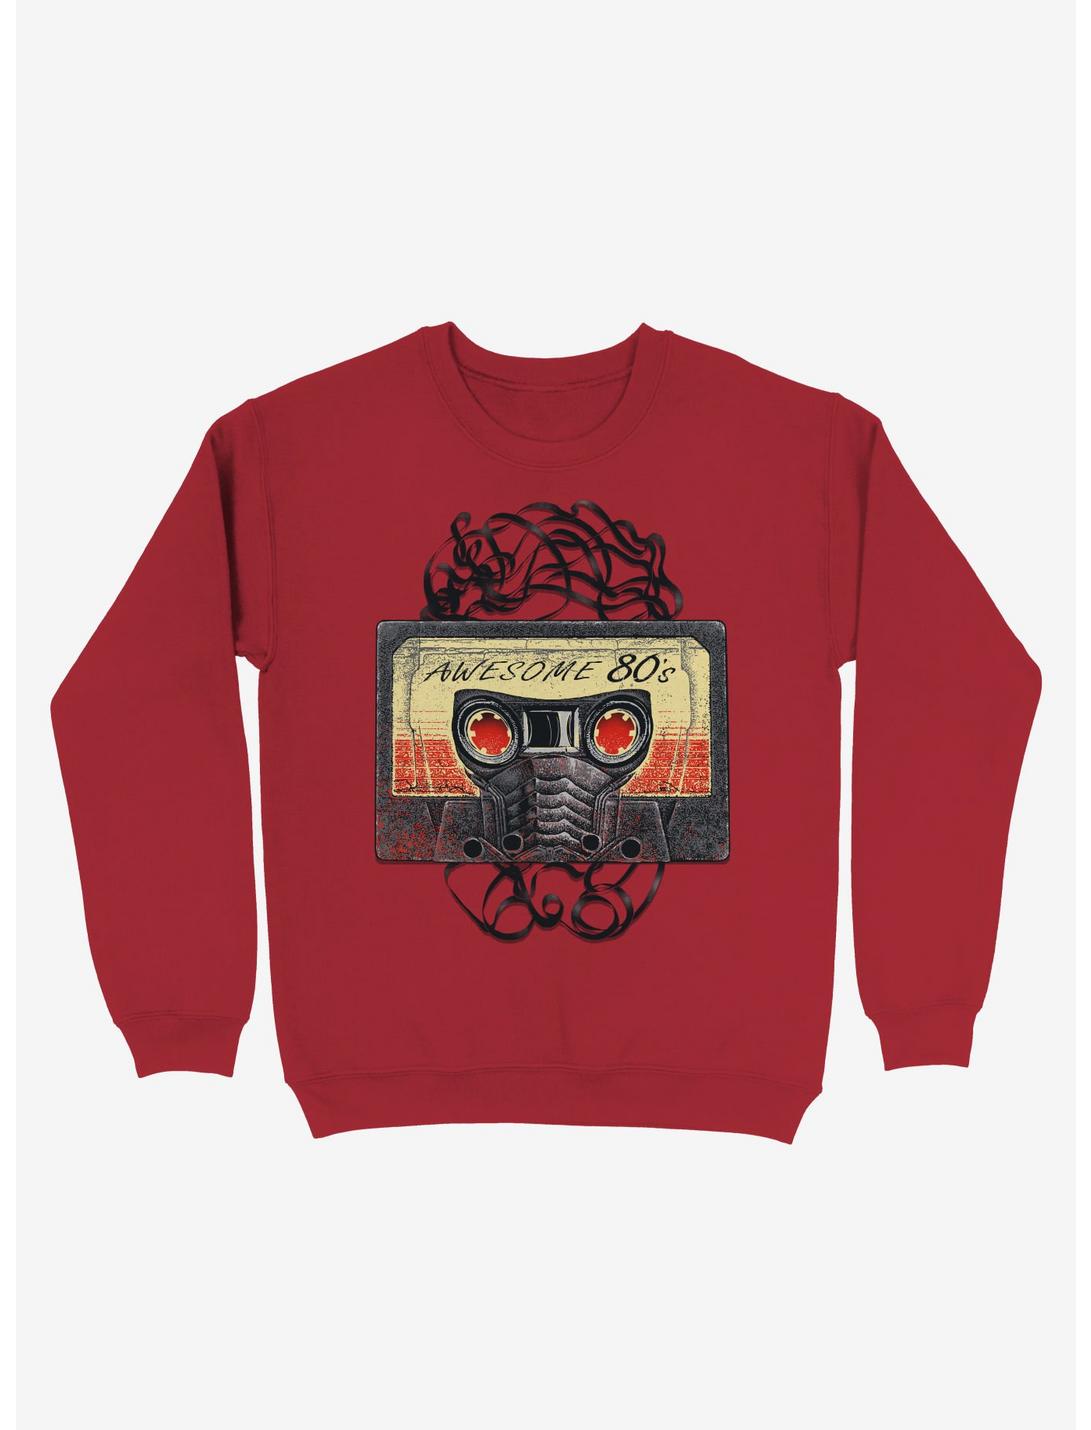 Awesome 80's Mixtape Red Sweatshirt, RED, hi-res